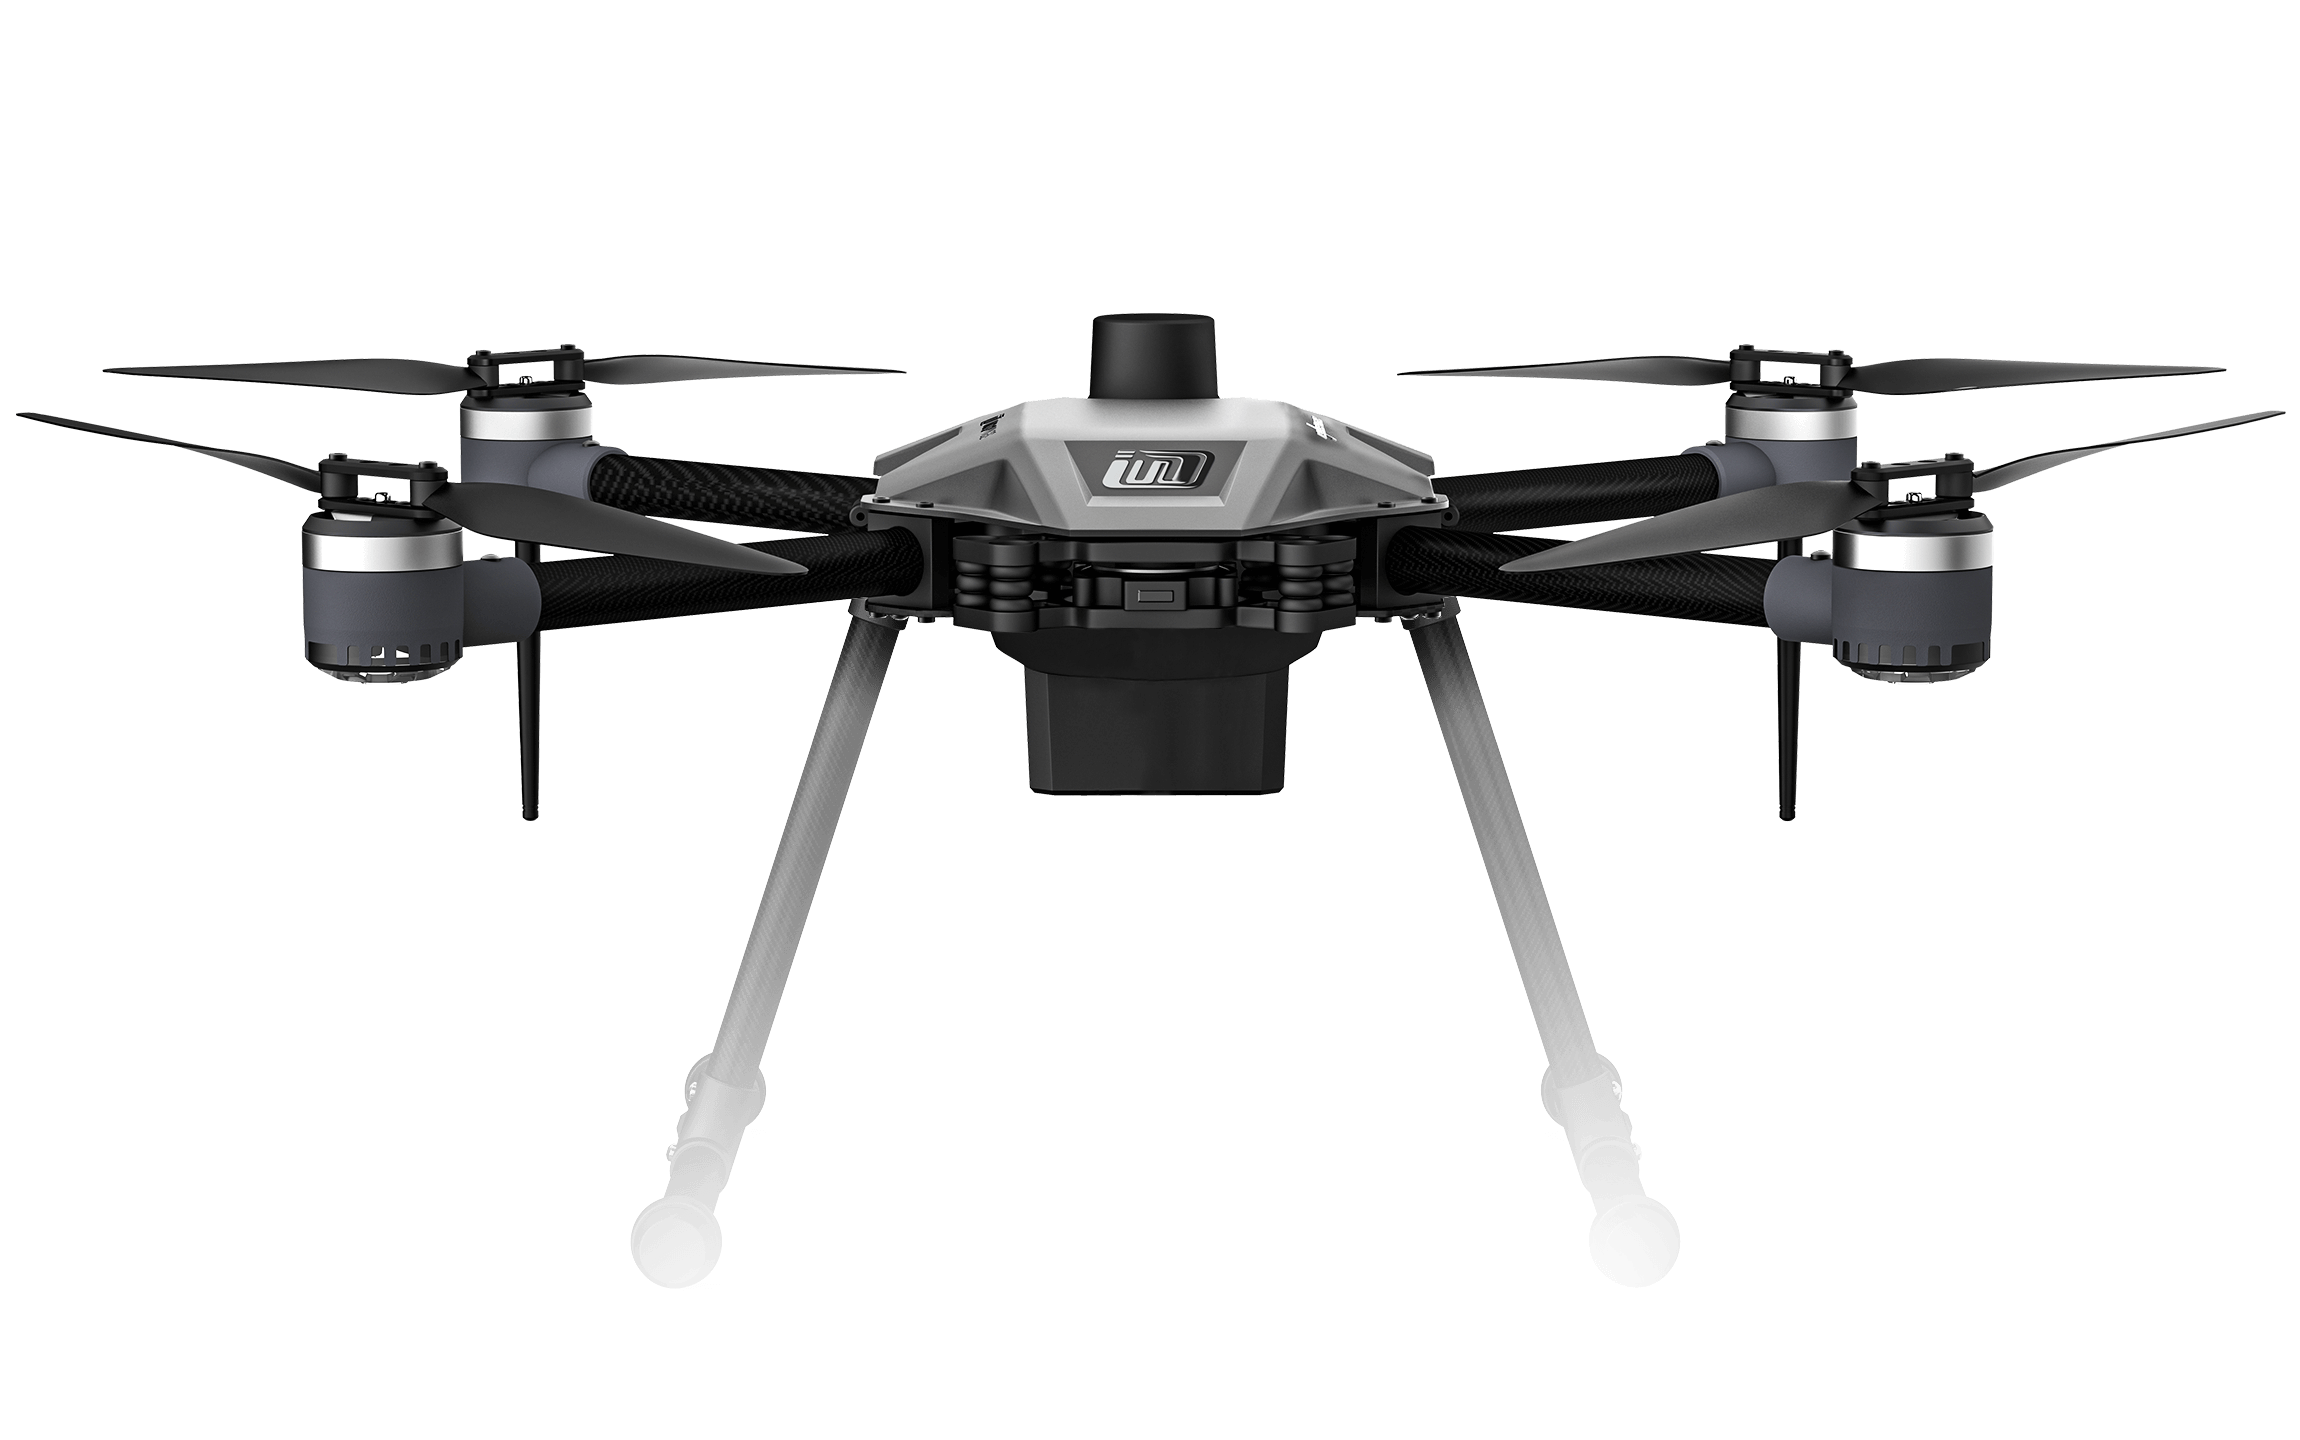 Black colored drone is placed on the floor with full of black surrounding